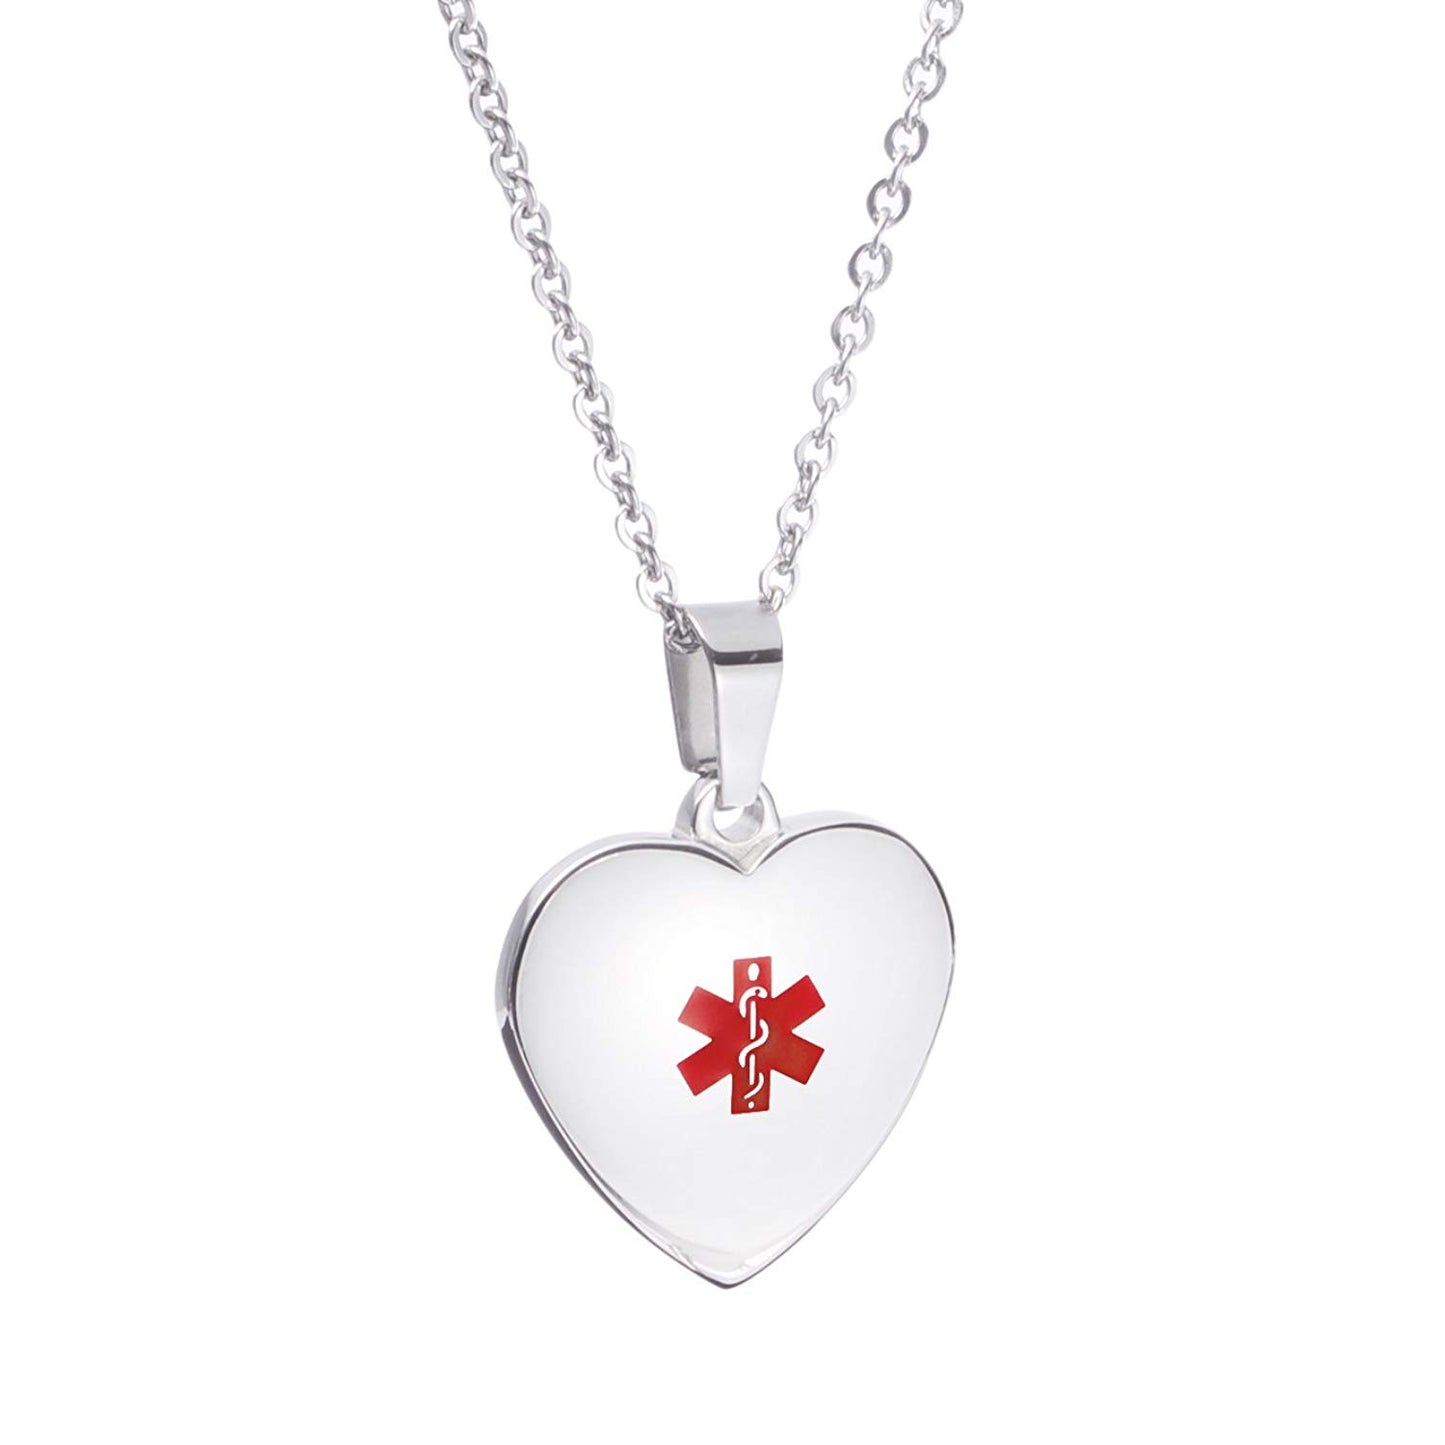 LinnaLove Free Engraving Heart Charm Medical ID Alert Necklaces for Women & Girl